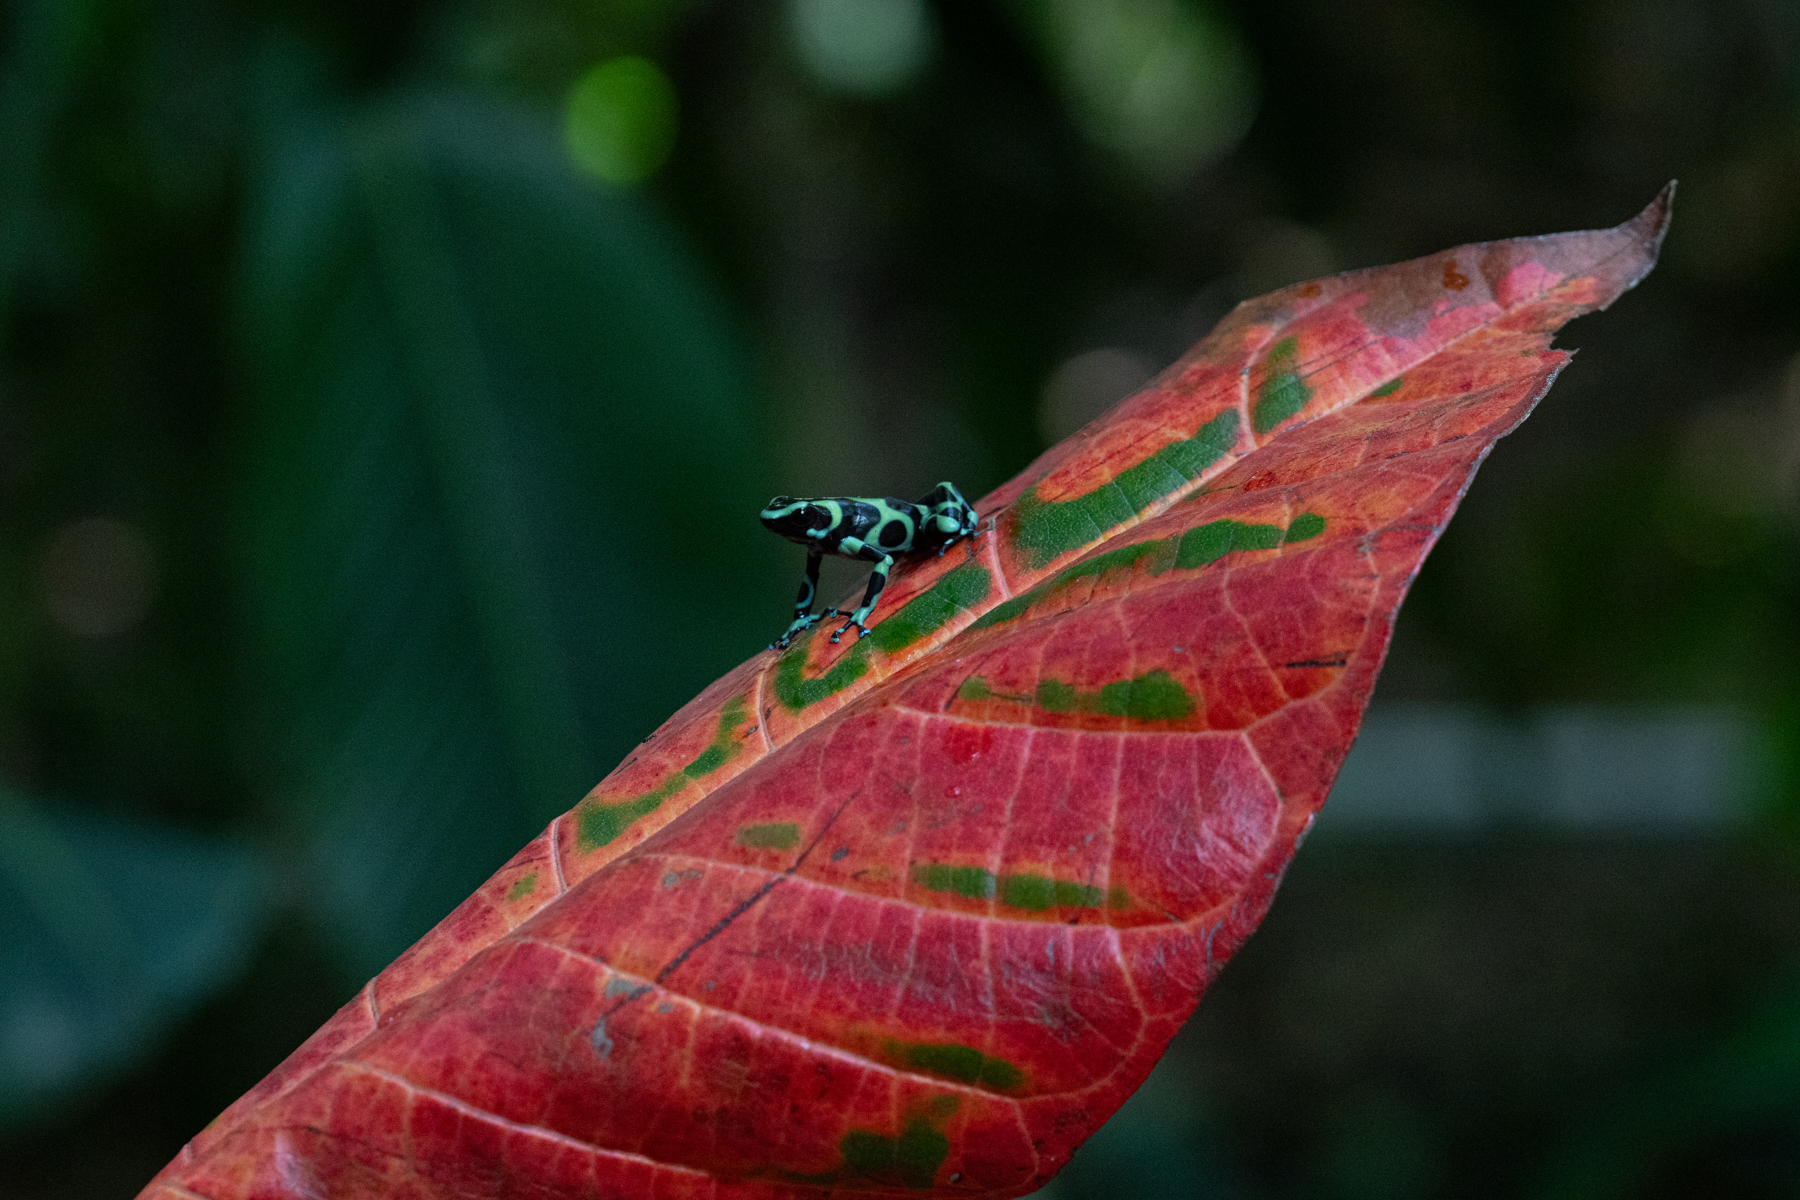 A tiny Green & Black Poison Dart frog sitting on a colourful Croton leaf (image by Inger Vandyke)